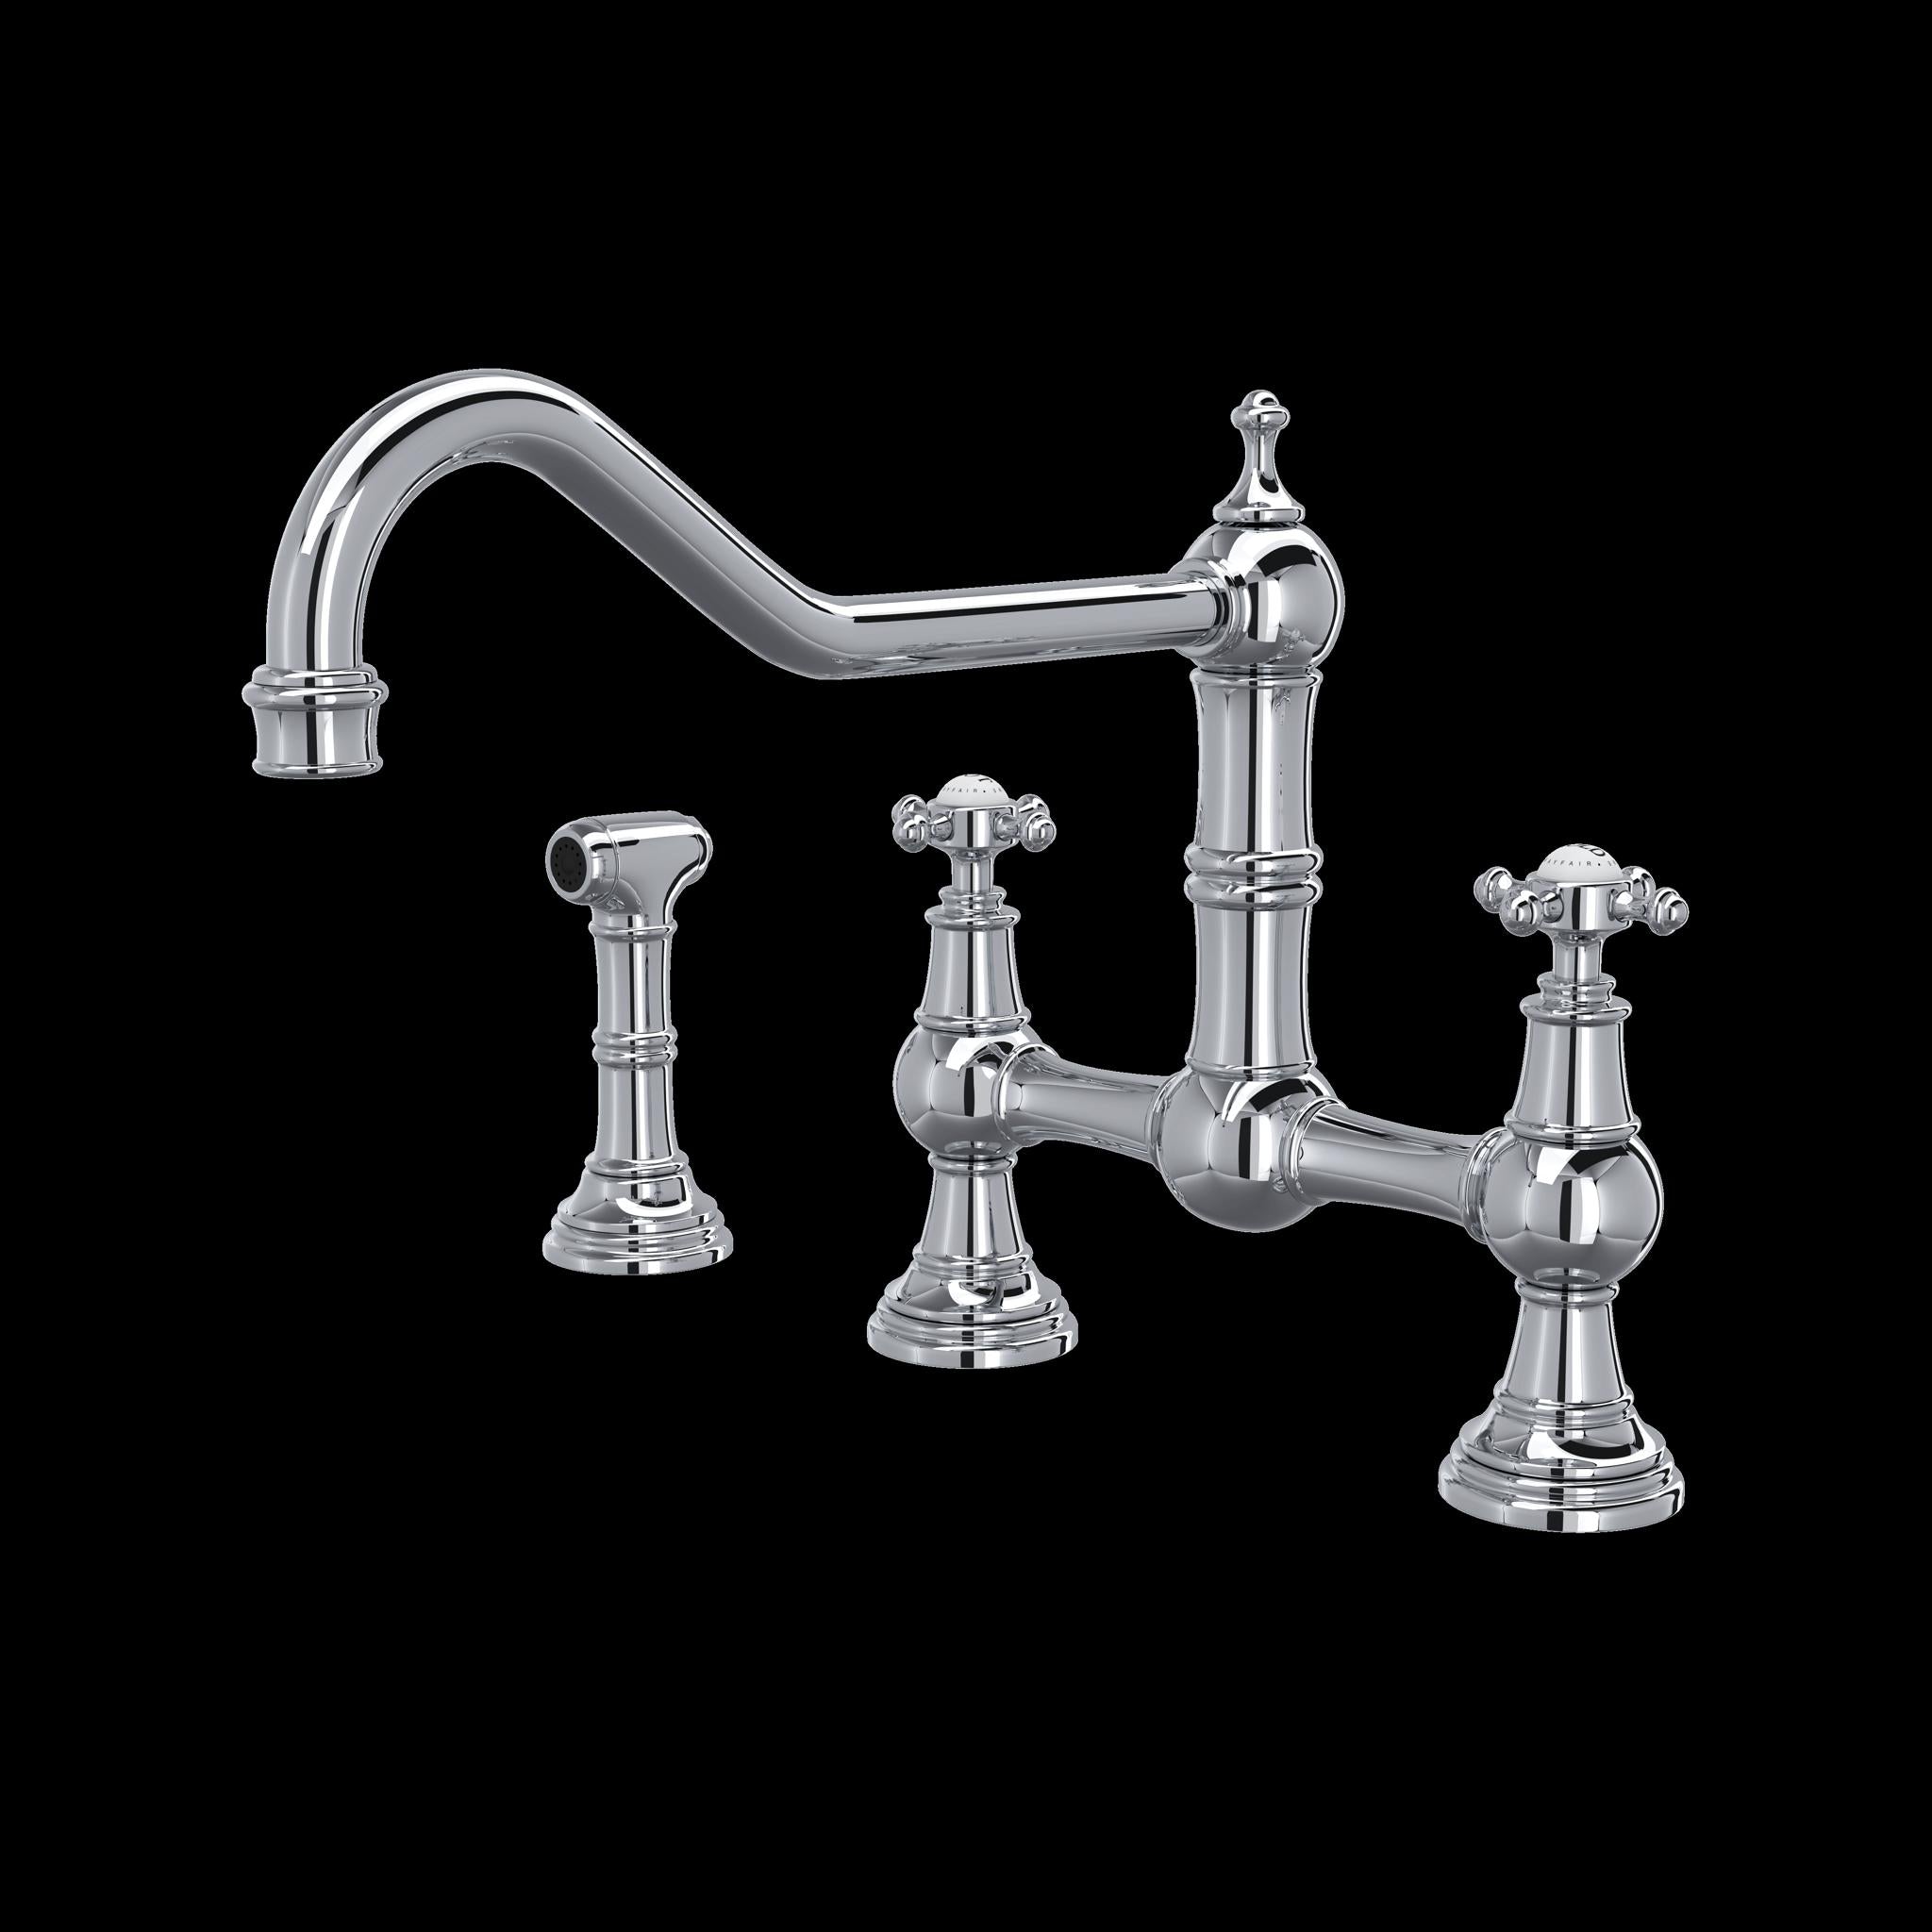 Perrin & Rowe U.4763 Edwardian Extended Spout Bridge Kitchen Faucet With Side Spray